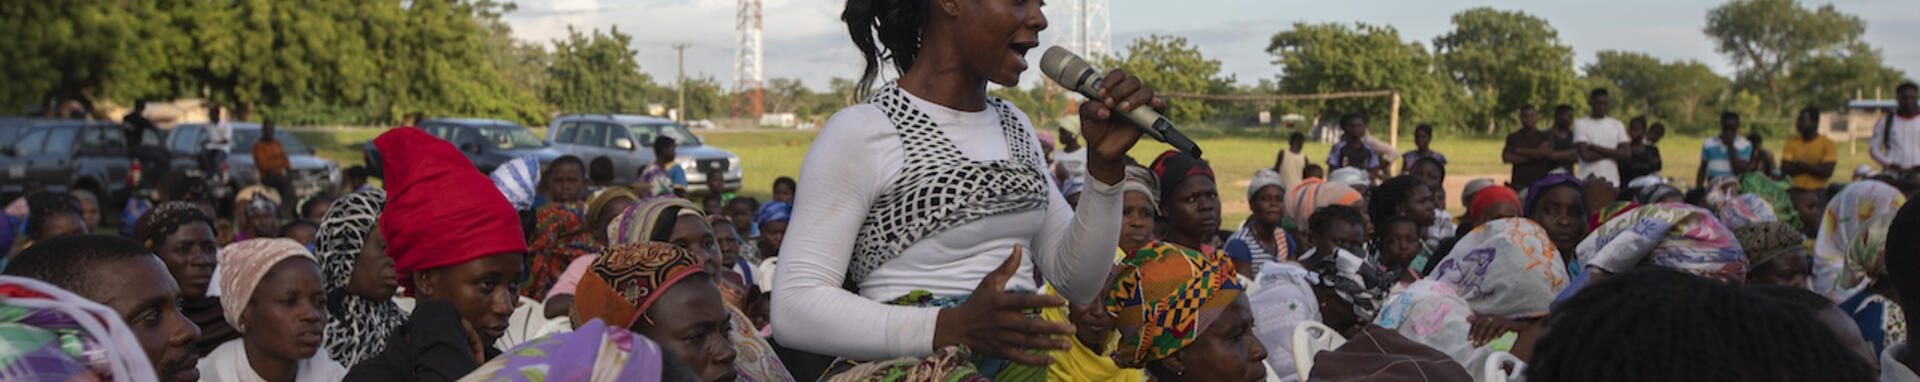 A young African woman is up on someone's shoulder in a demonstration and talking in a microphone